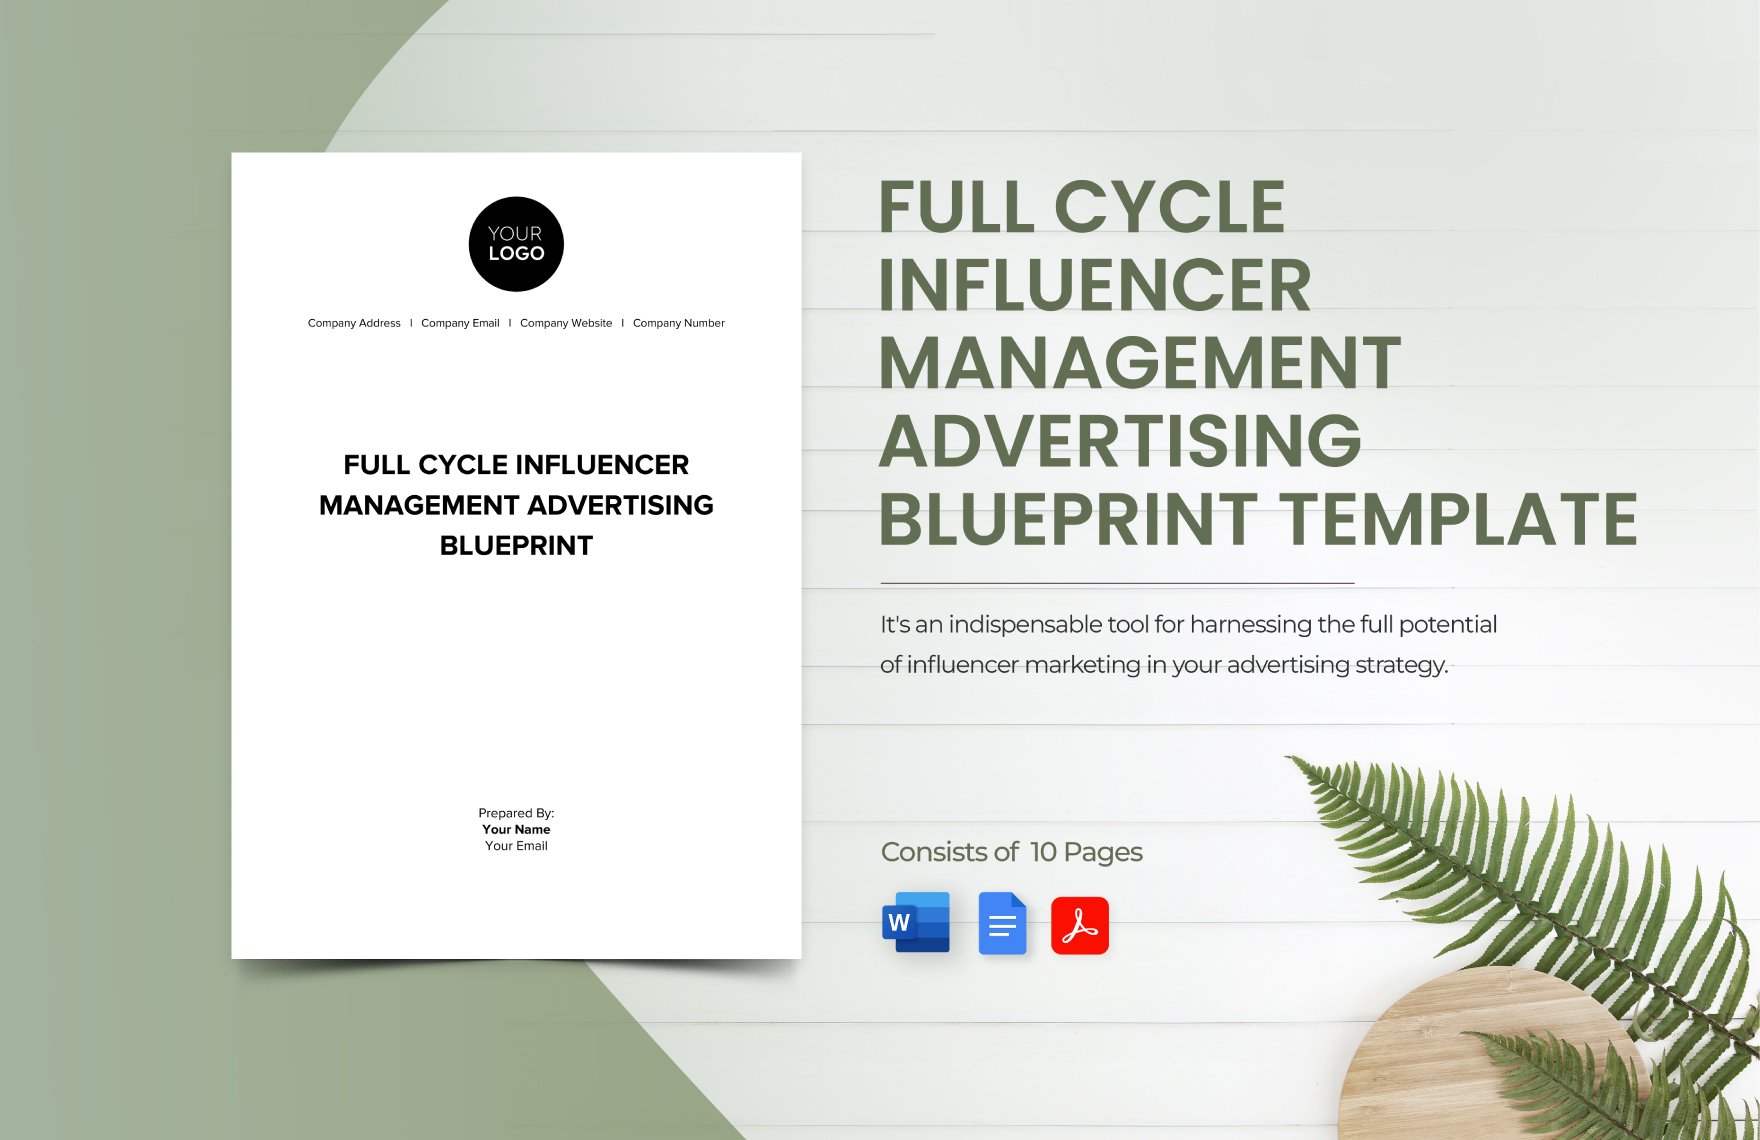 Full Cycle Influencer Management Advertising Blueprint Template